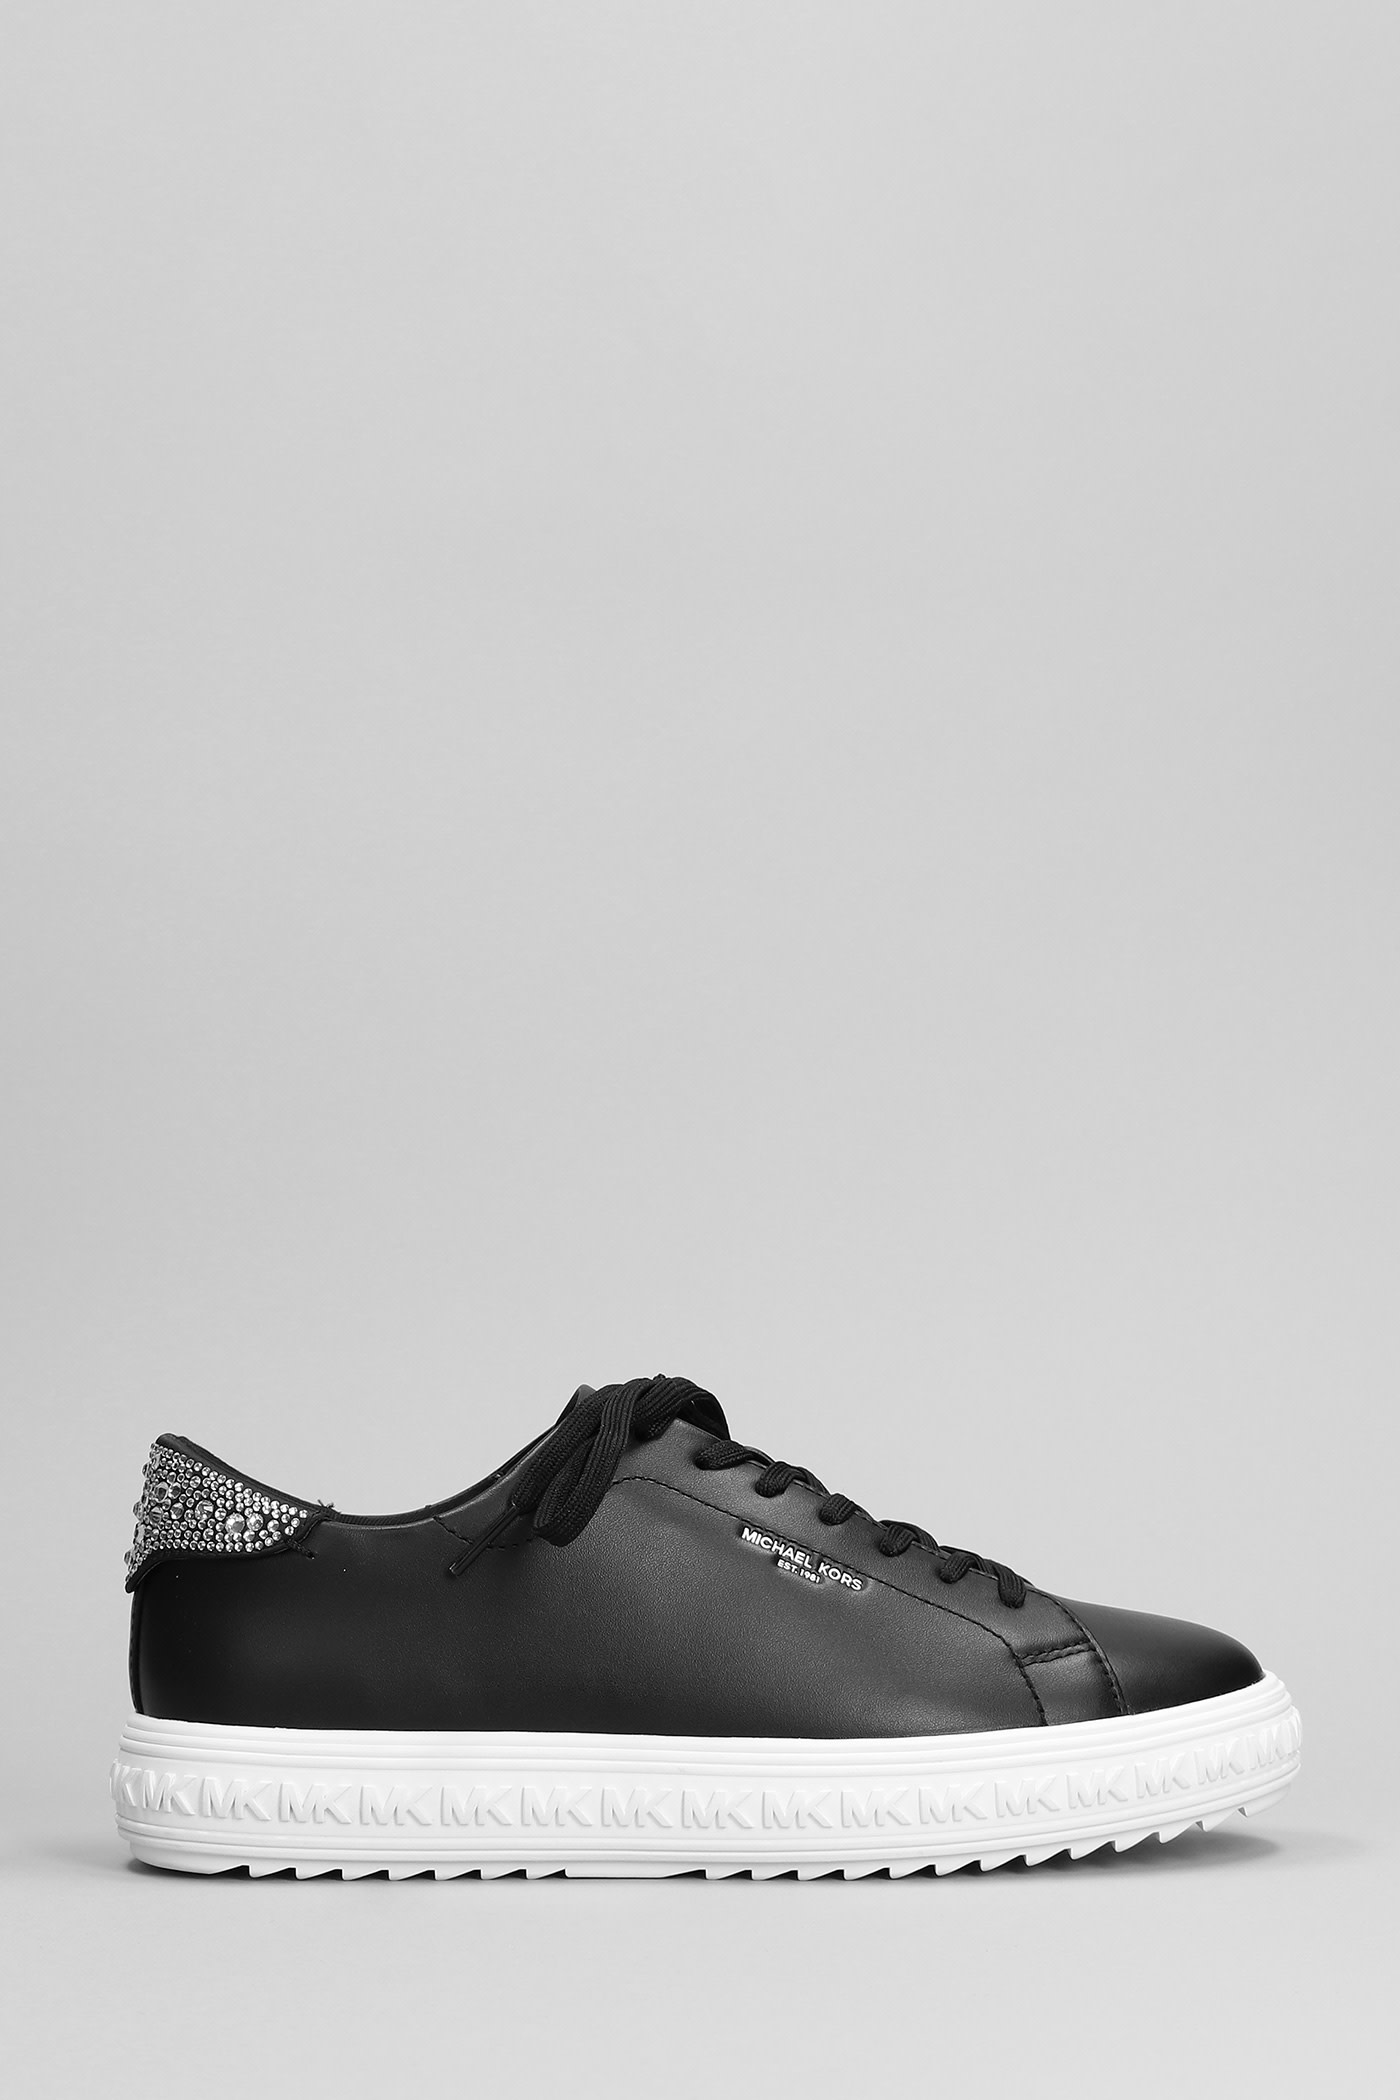 Shop Michael Kors Grove Lake Up Sneakers In Black Leather And Fabric